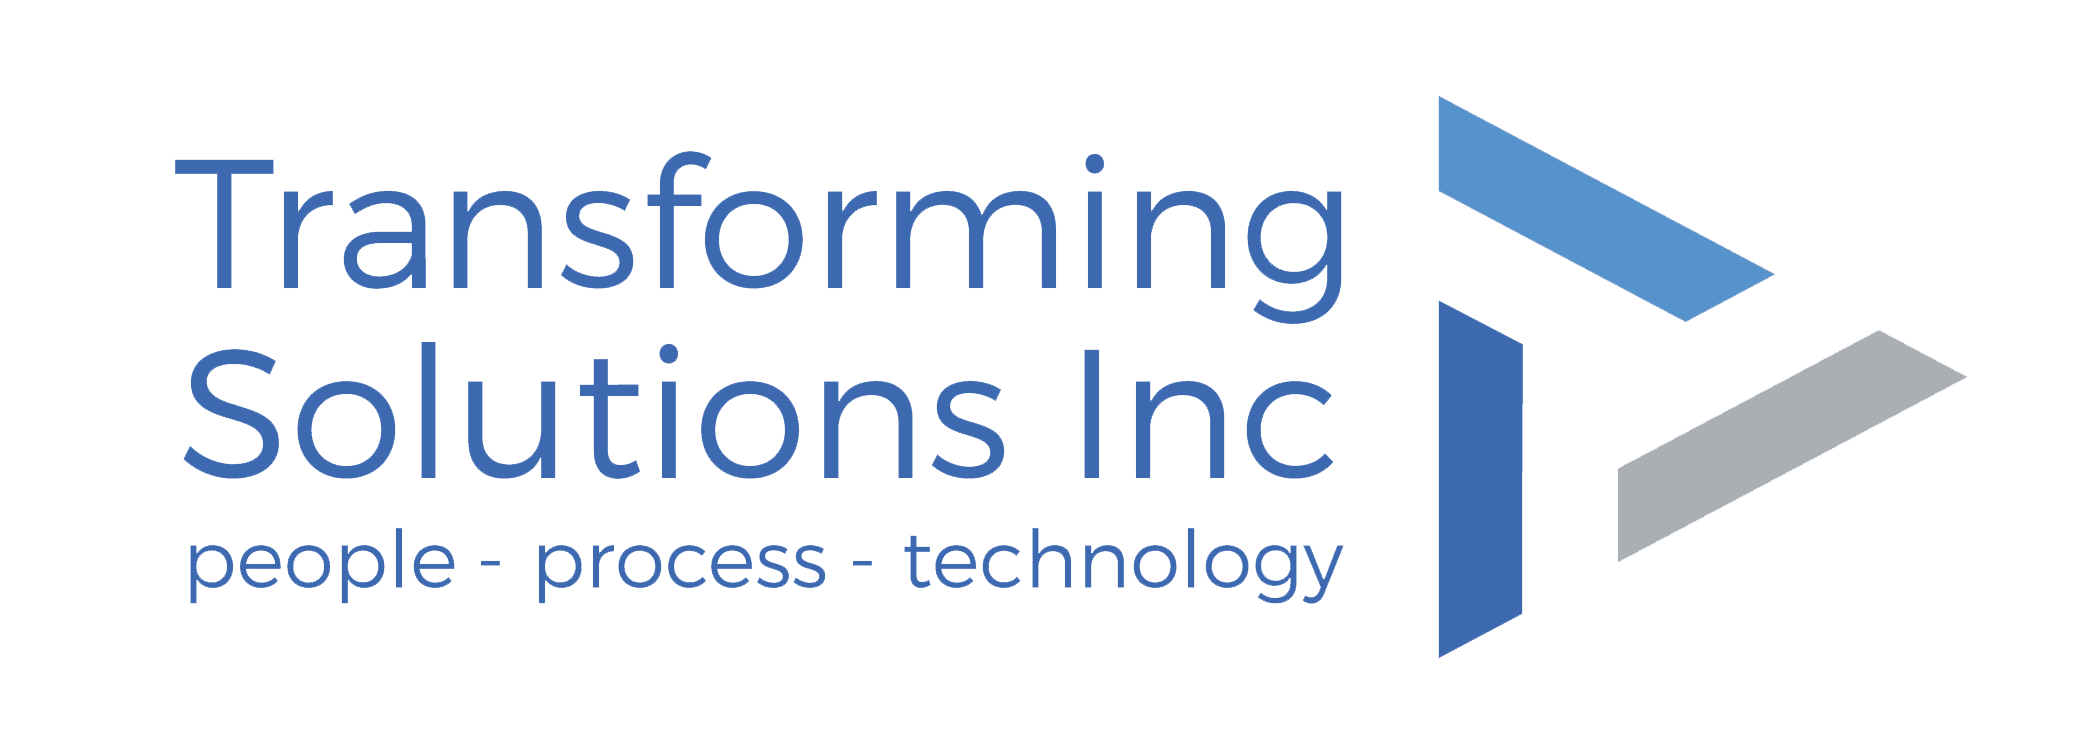 Transforming Solutions Inc. Logo for Celebrating 26 Years